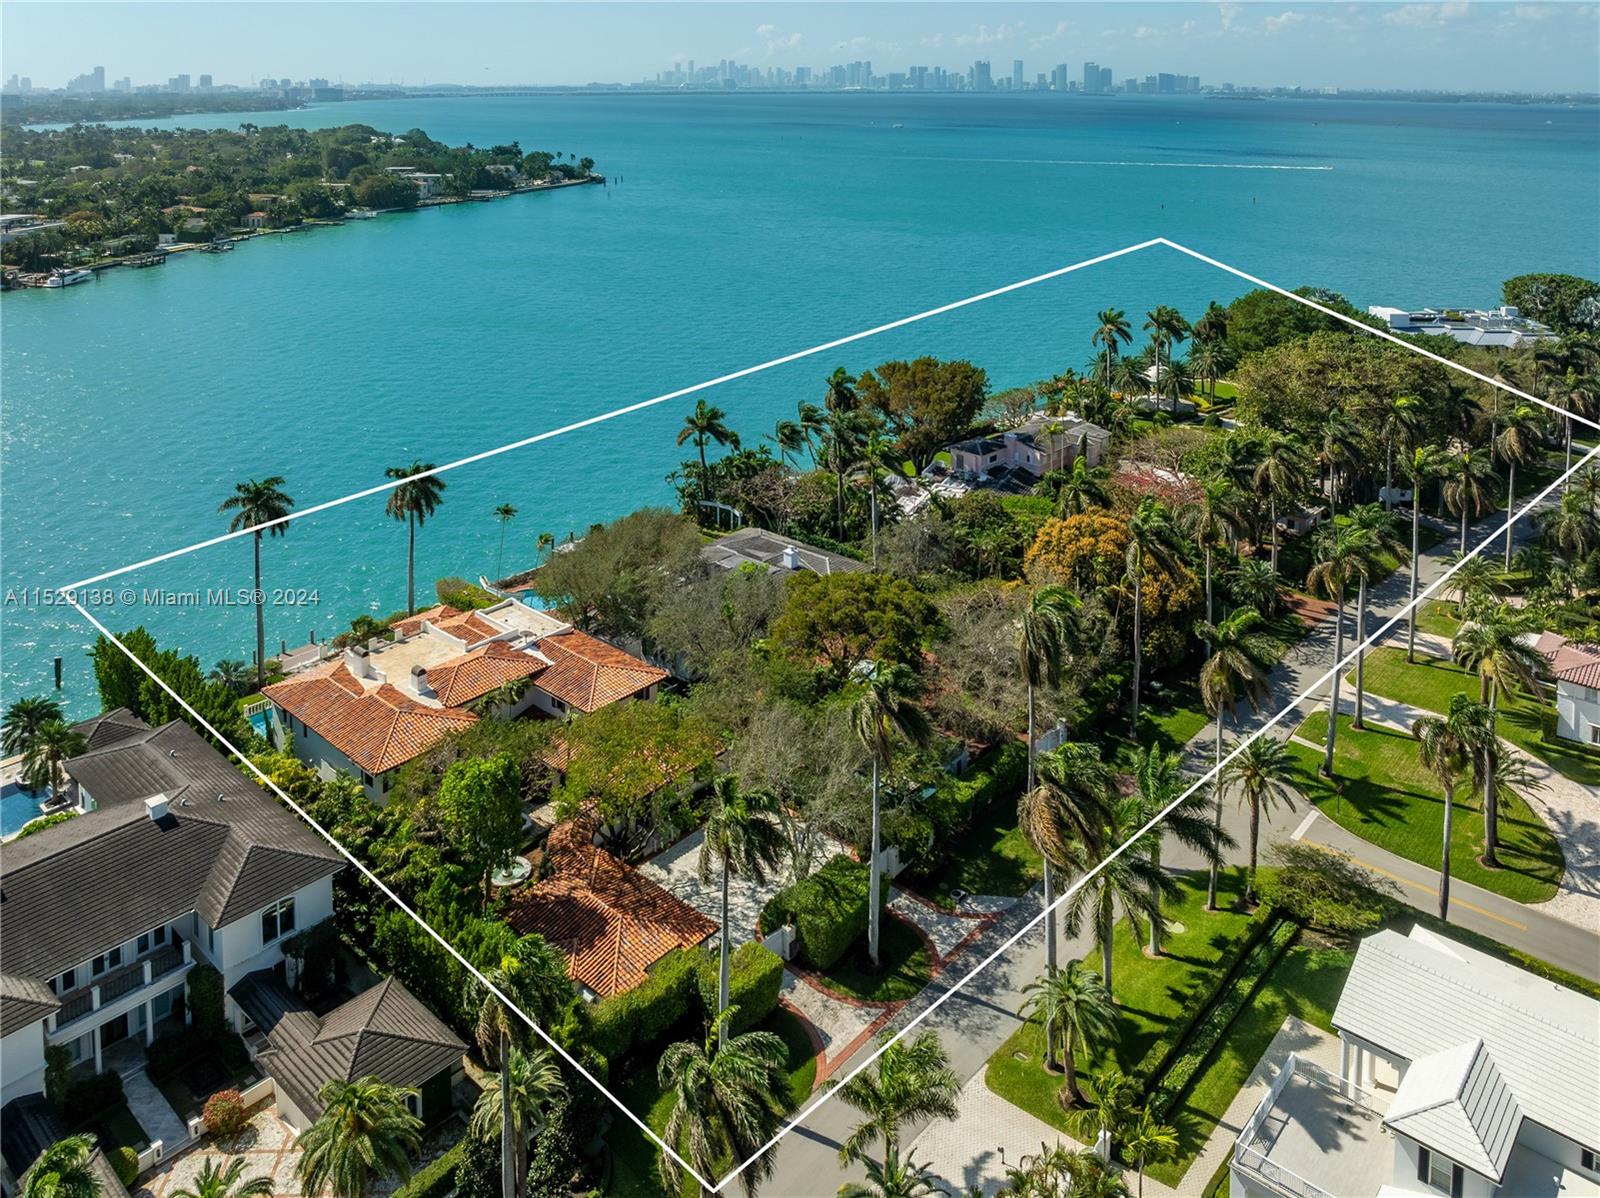 Seize this extraordinary opportunity to own a property that transcends the ordinary. For the first time ever, the premier 18 La Gorce assemblage will be available individually or in its entirety.16 La Gorce offered at $23M (20,275 sf lot, waterfront: 100’) 18 La Gorce offered at $28.5M (25,282 sf lot, waterfront: 125’) 22 La Gorce offered at $36M (34,119 sf lot, waterfront: 175’) 24 La Gorce offered at $51M (45,112 sf lot, waterfront: 250’). Craft your own legacy on the premier southern side of the prestigious & guarded La Gorce Island. When purchased in its entirety, this expansive land assemblage totaling 124,788 sf is being offered for $132M & stands as the largest estate available on Miami Beach, with 650’ of waterfront boasting unparalleled vistas of Biscayne Bay & the Miami skyline.